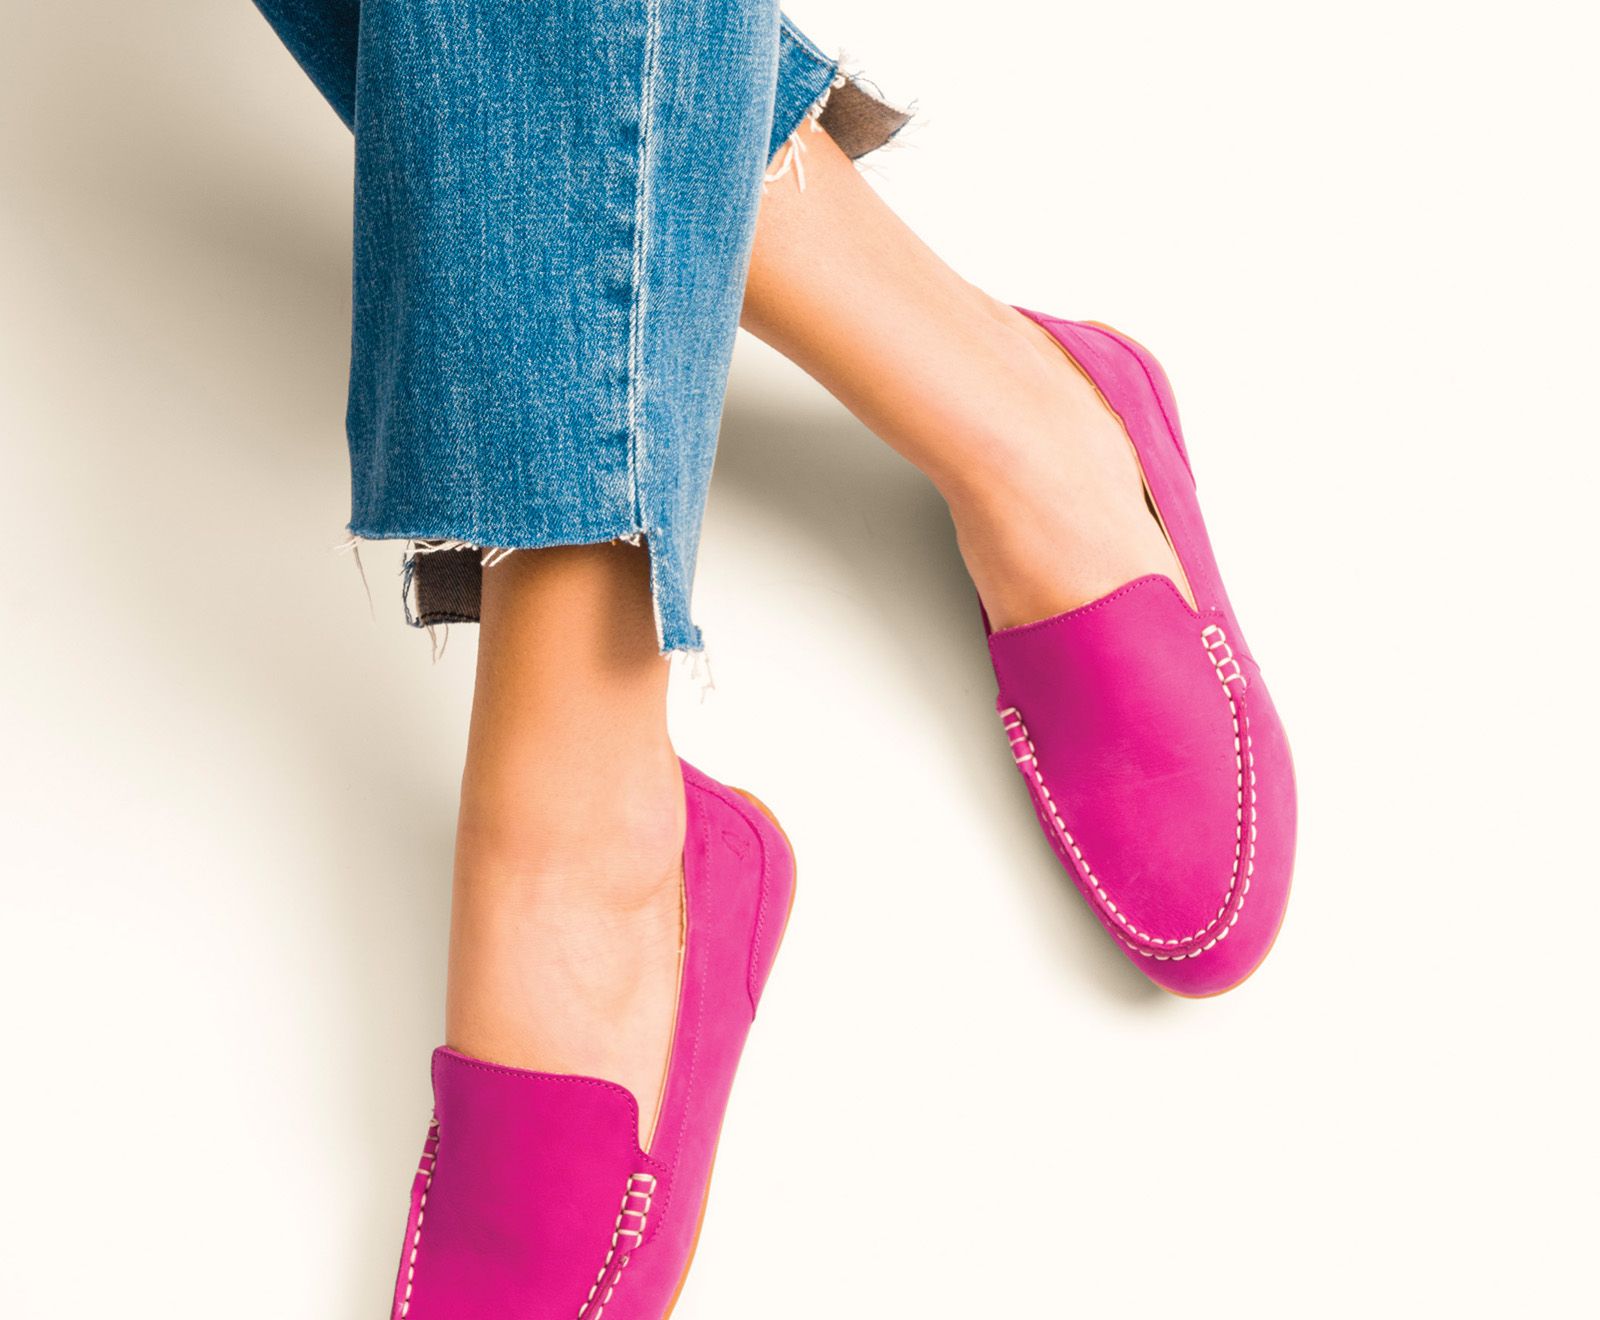 Loafers Hush Puppies Cora Mujer Very Berry Nubuck | LOZHCRM-29